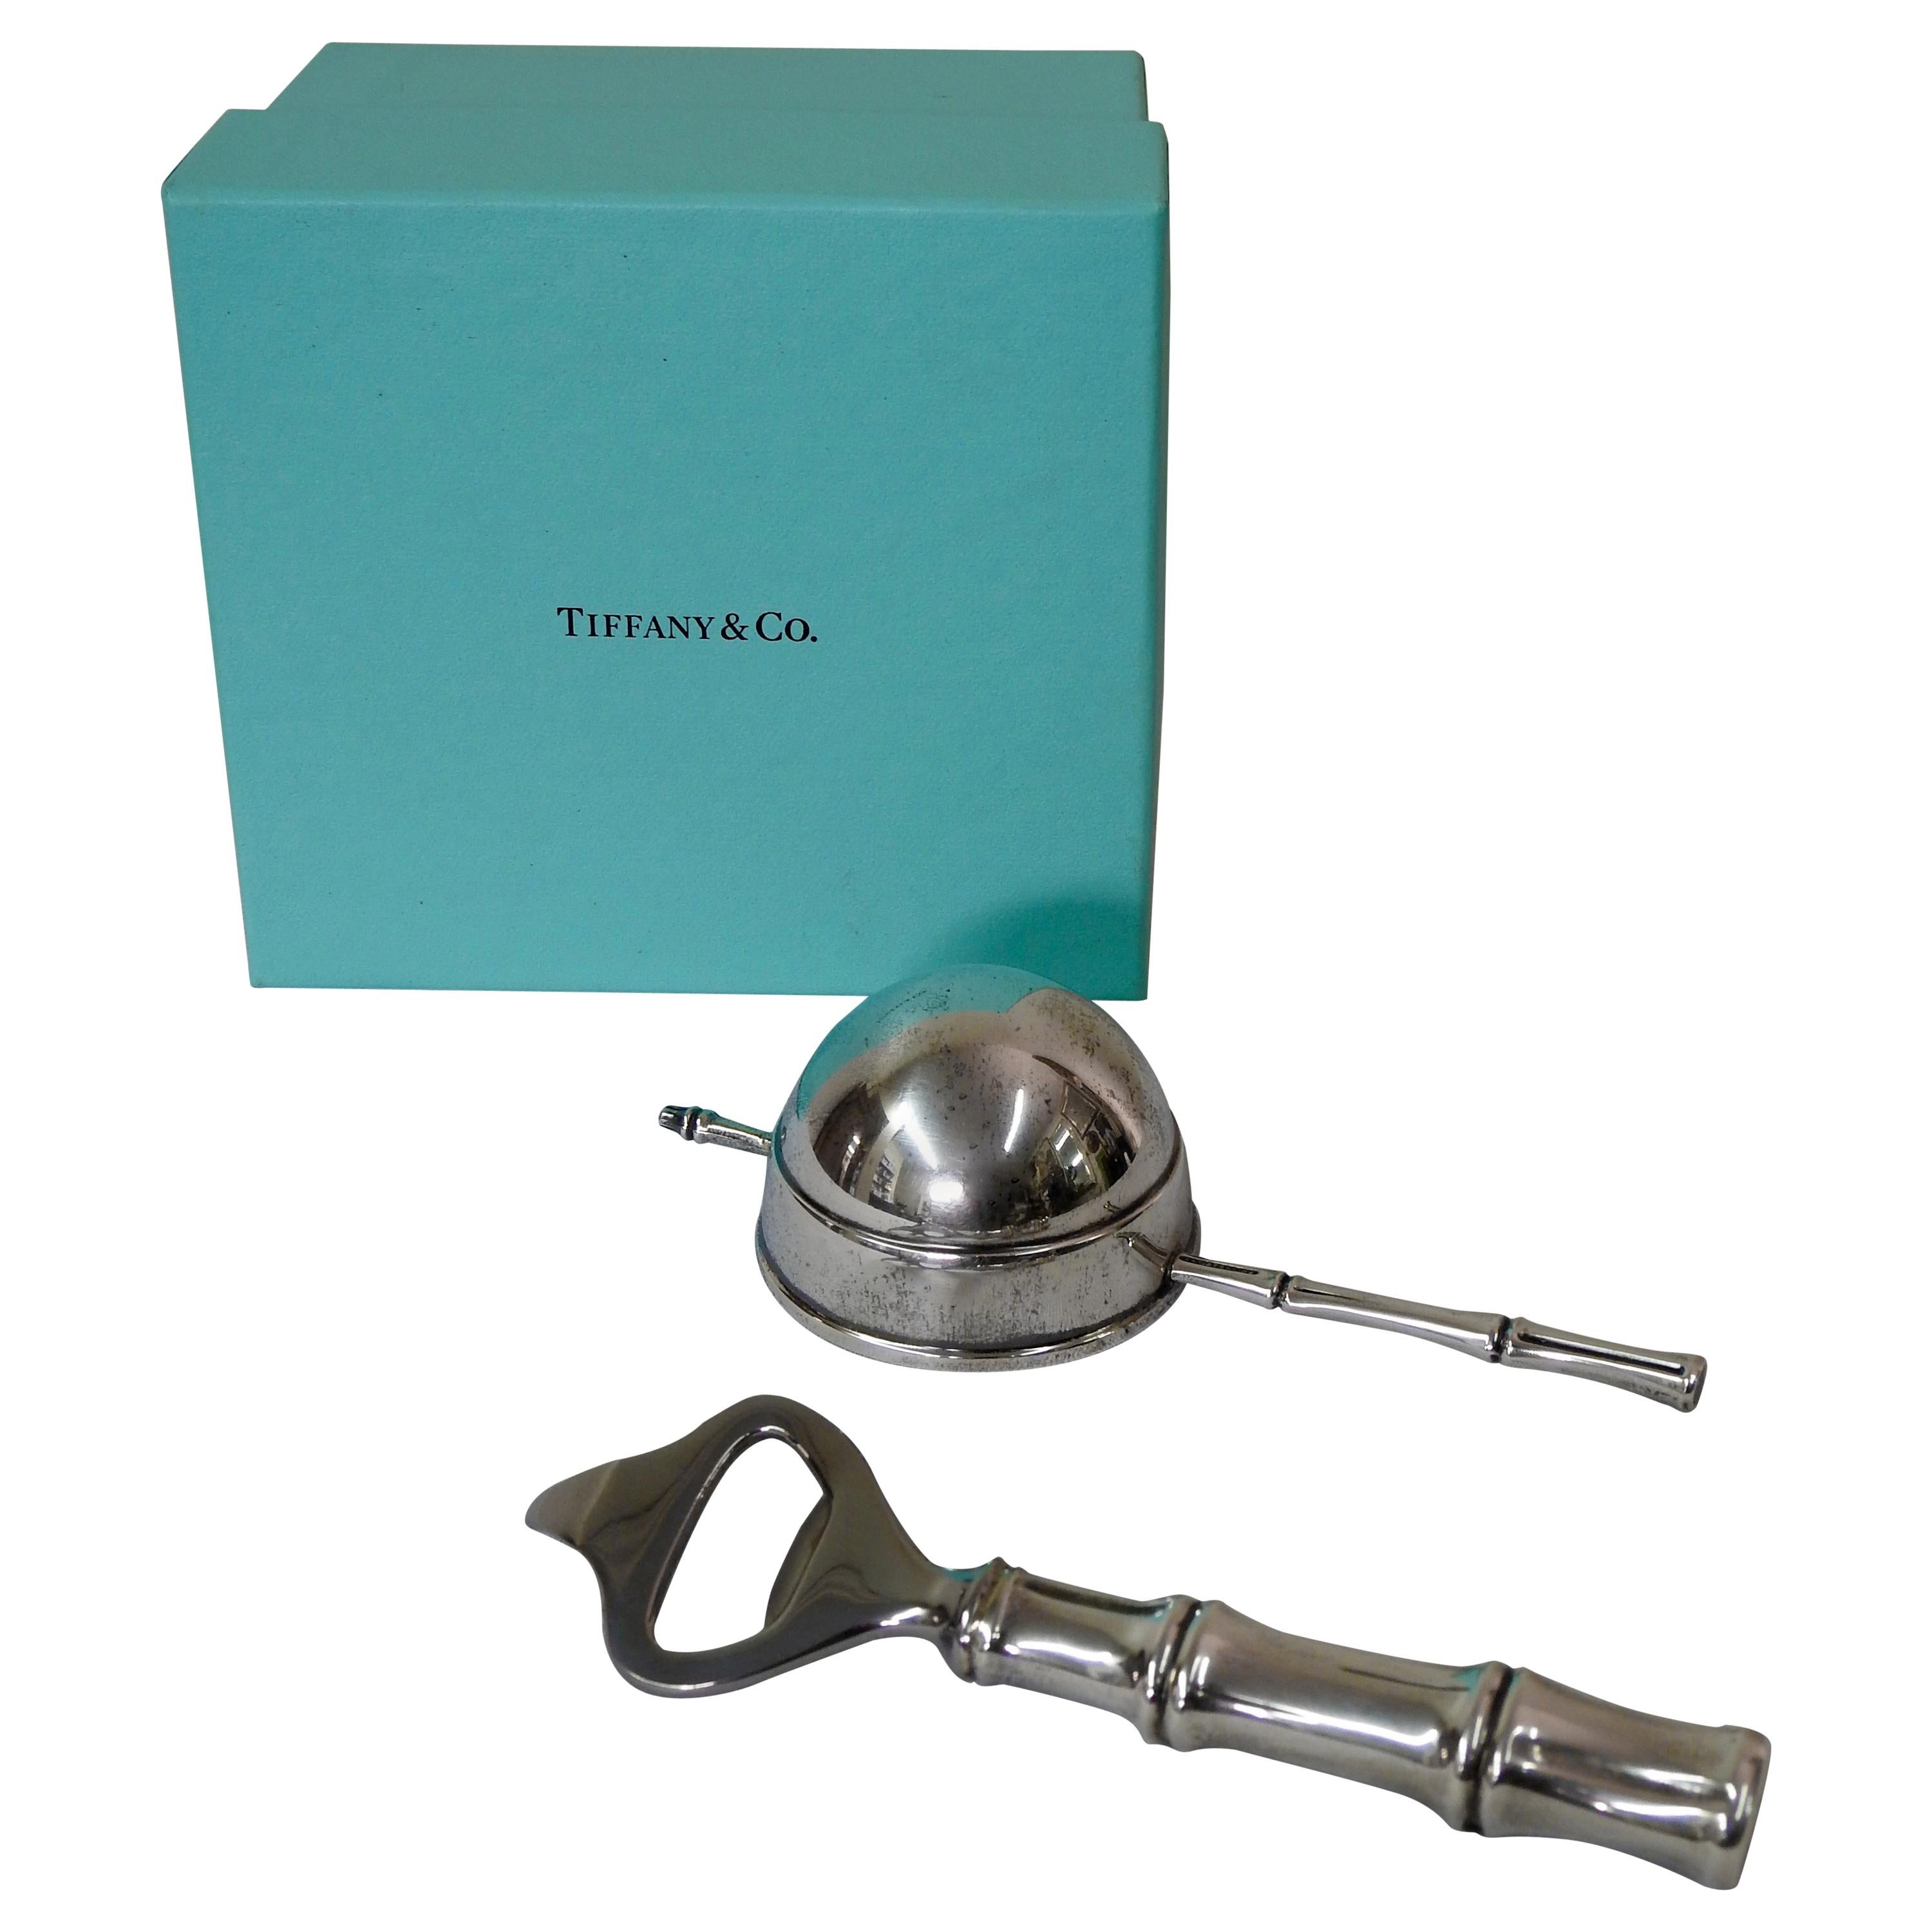 Tiffany & Co. Sterling Bamboo Bottle Opener and Jigger with Box